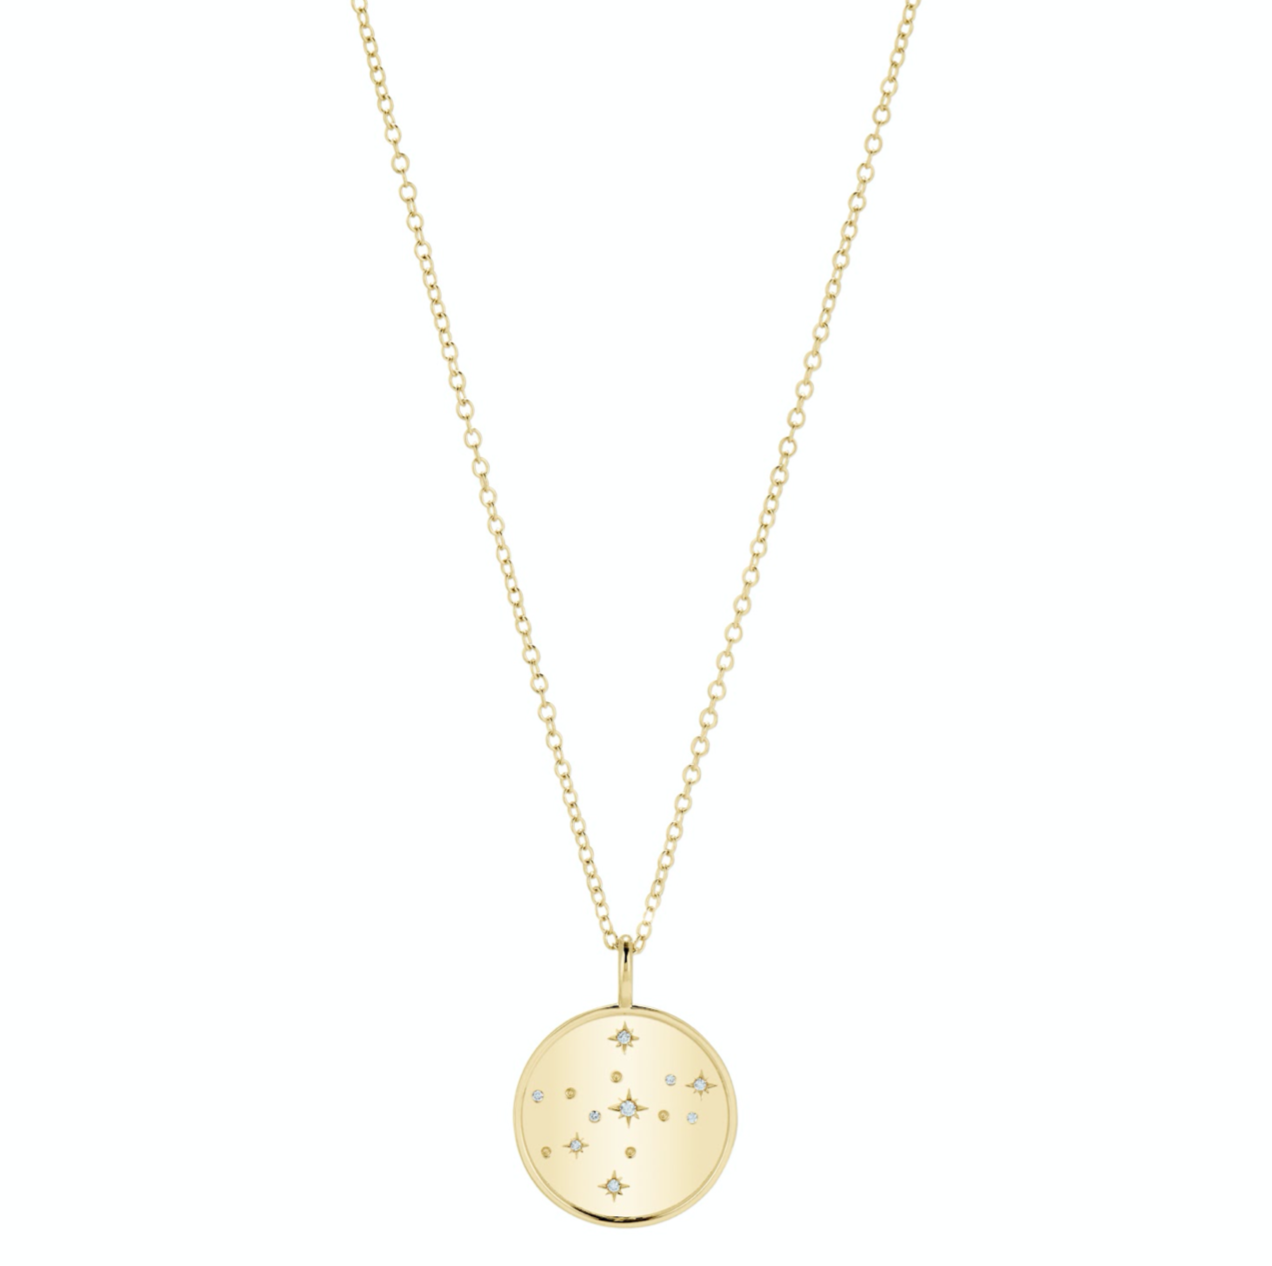 Double Sided Virgo Constellation Necklace